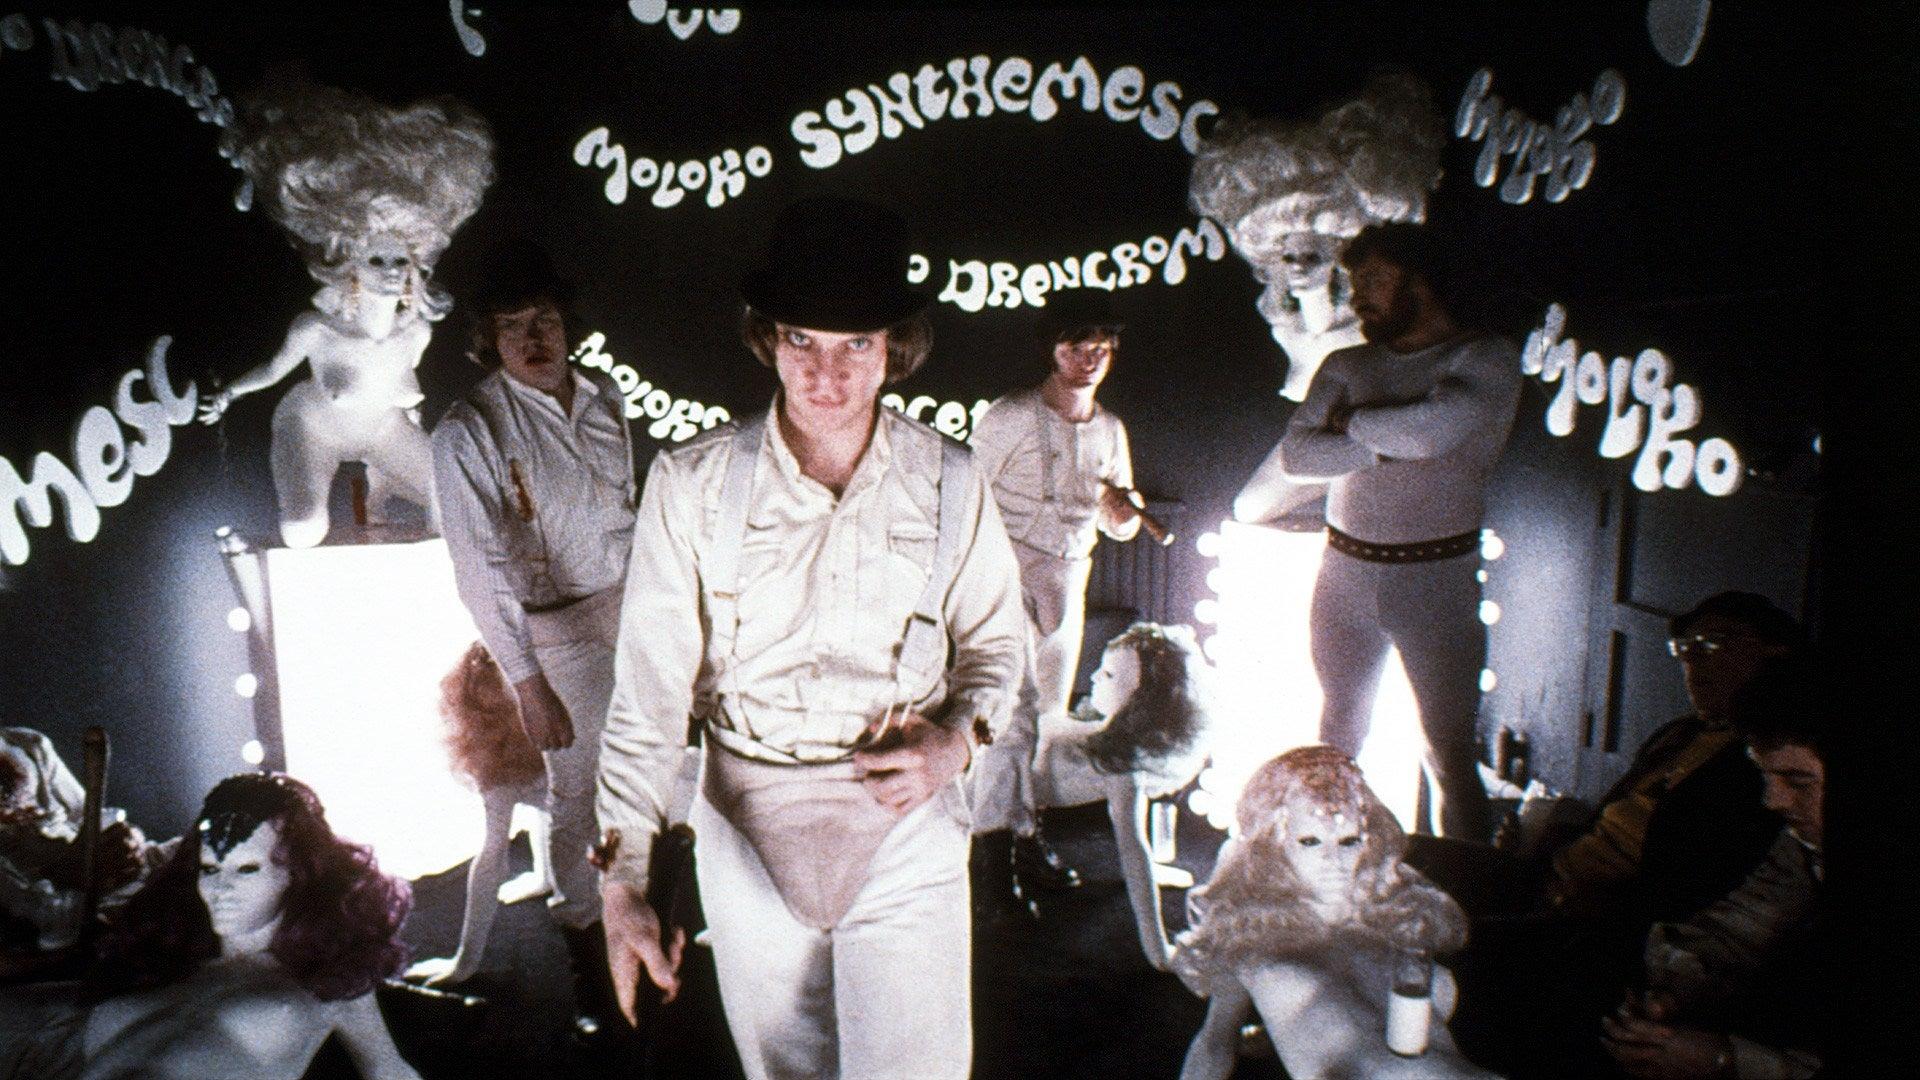 Stanley Kubrick's 'A Clockwork Orange' also gained accusations of so-called obscenity, prompting the director to withdraw it from circulation